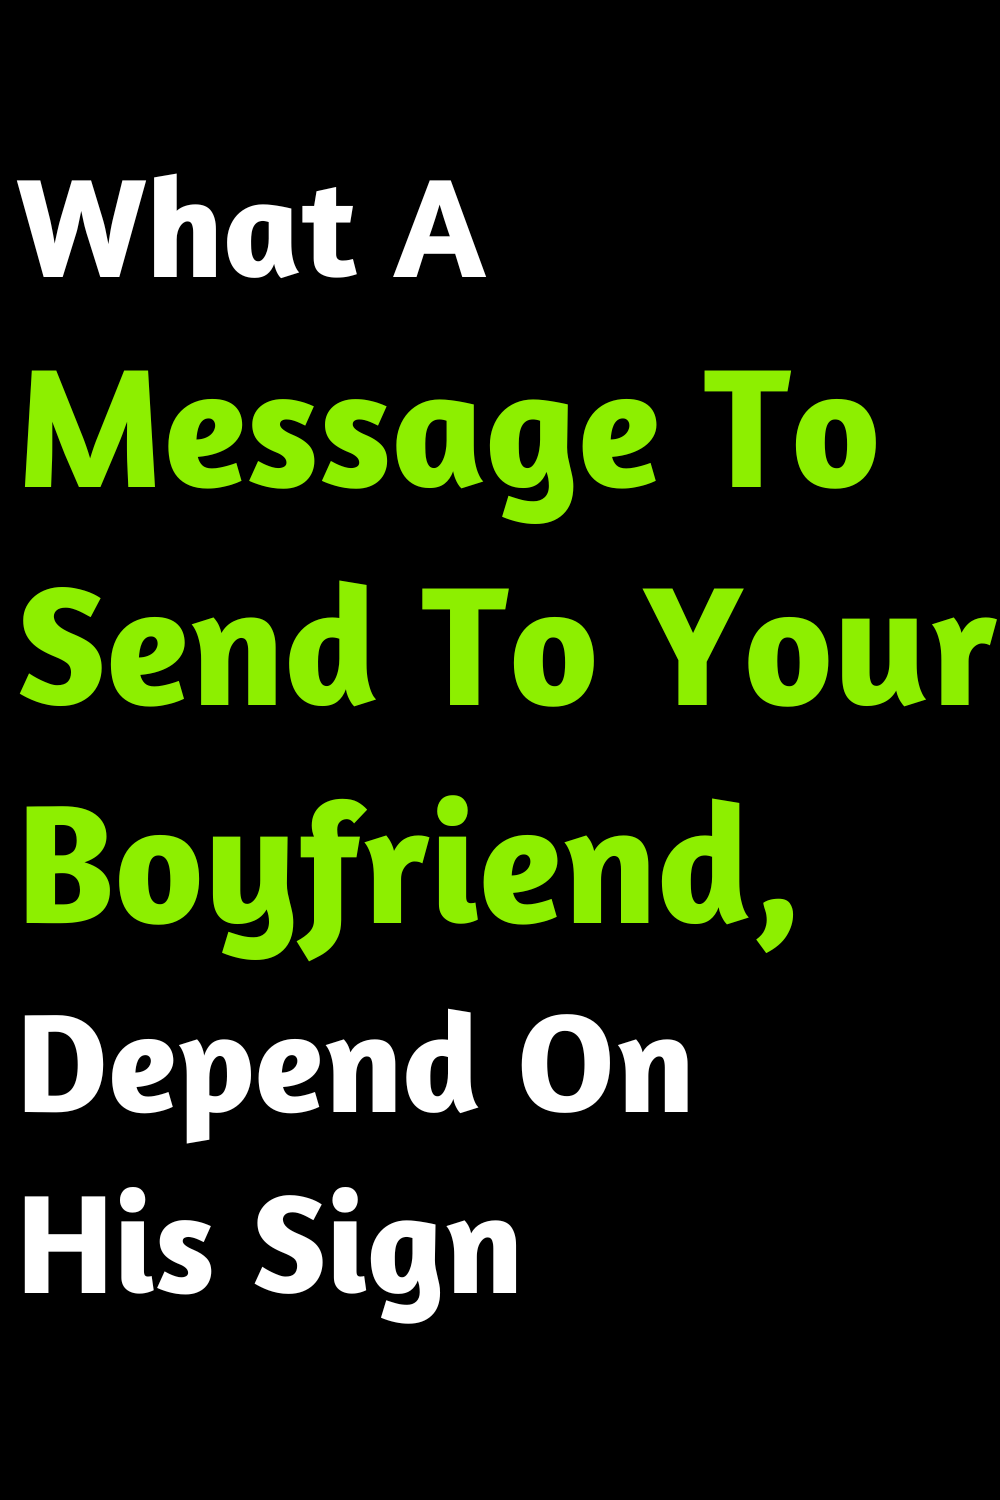 What A Message To Send To Your Boyfriend, Depend On His Sign